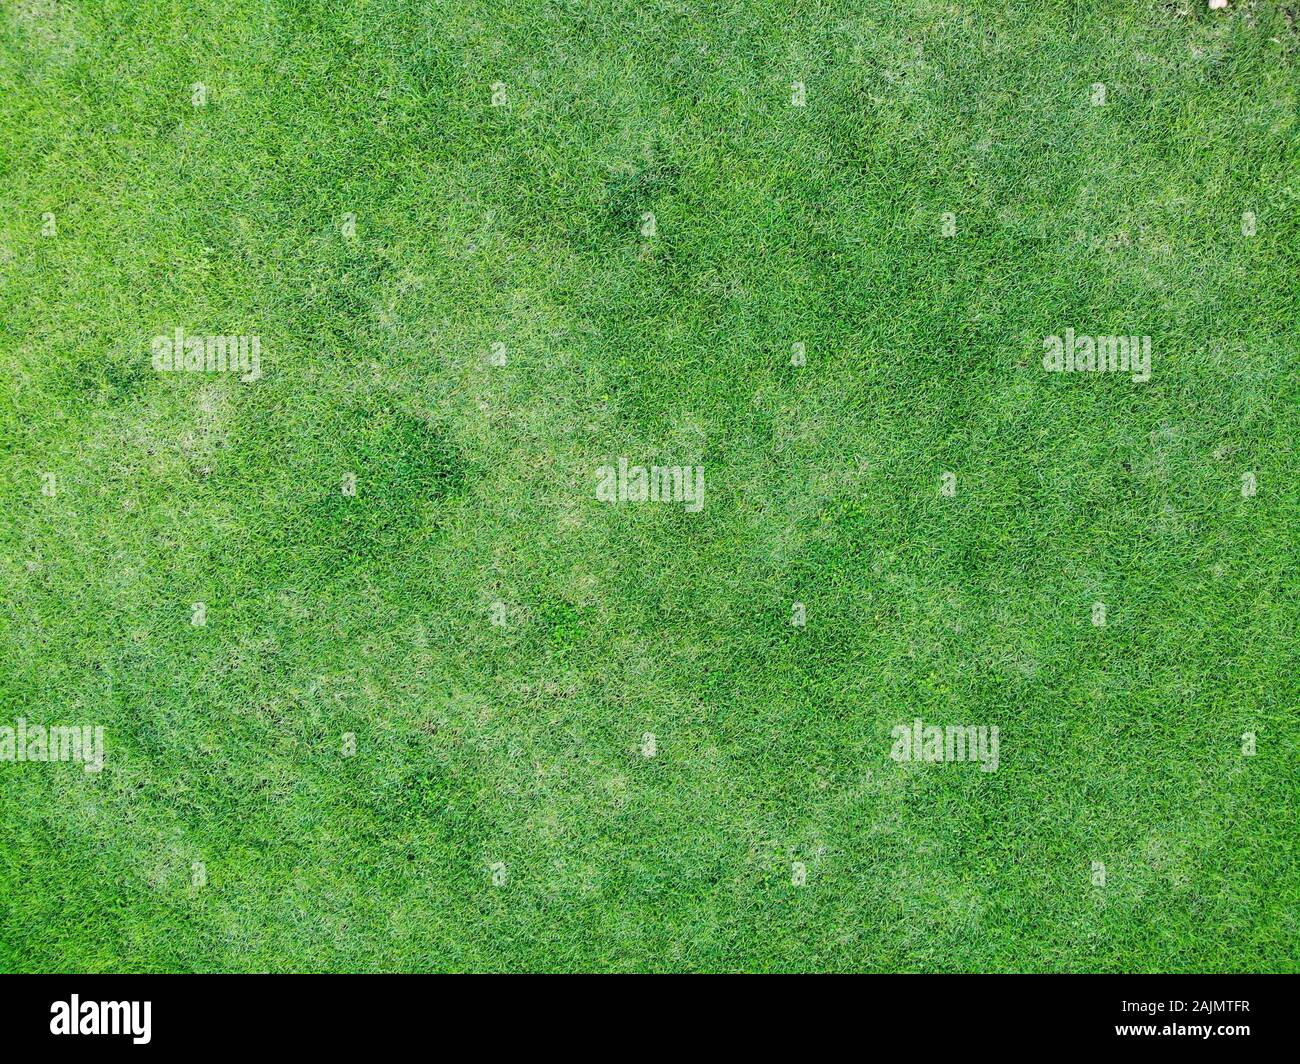 Grass Texture High Resolution Stock Photography And Images Alamy